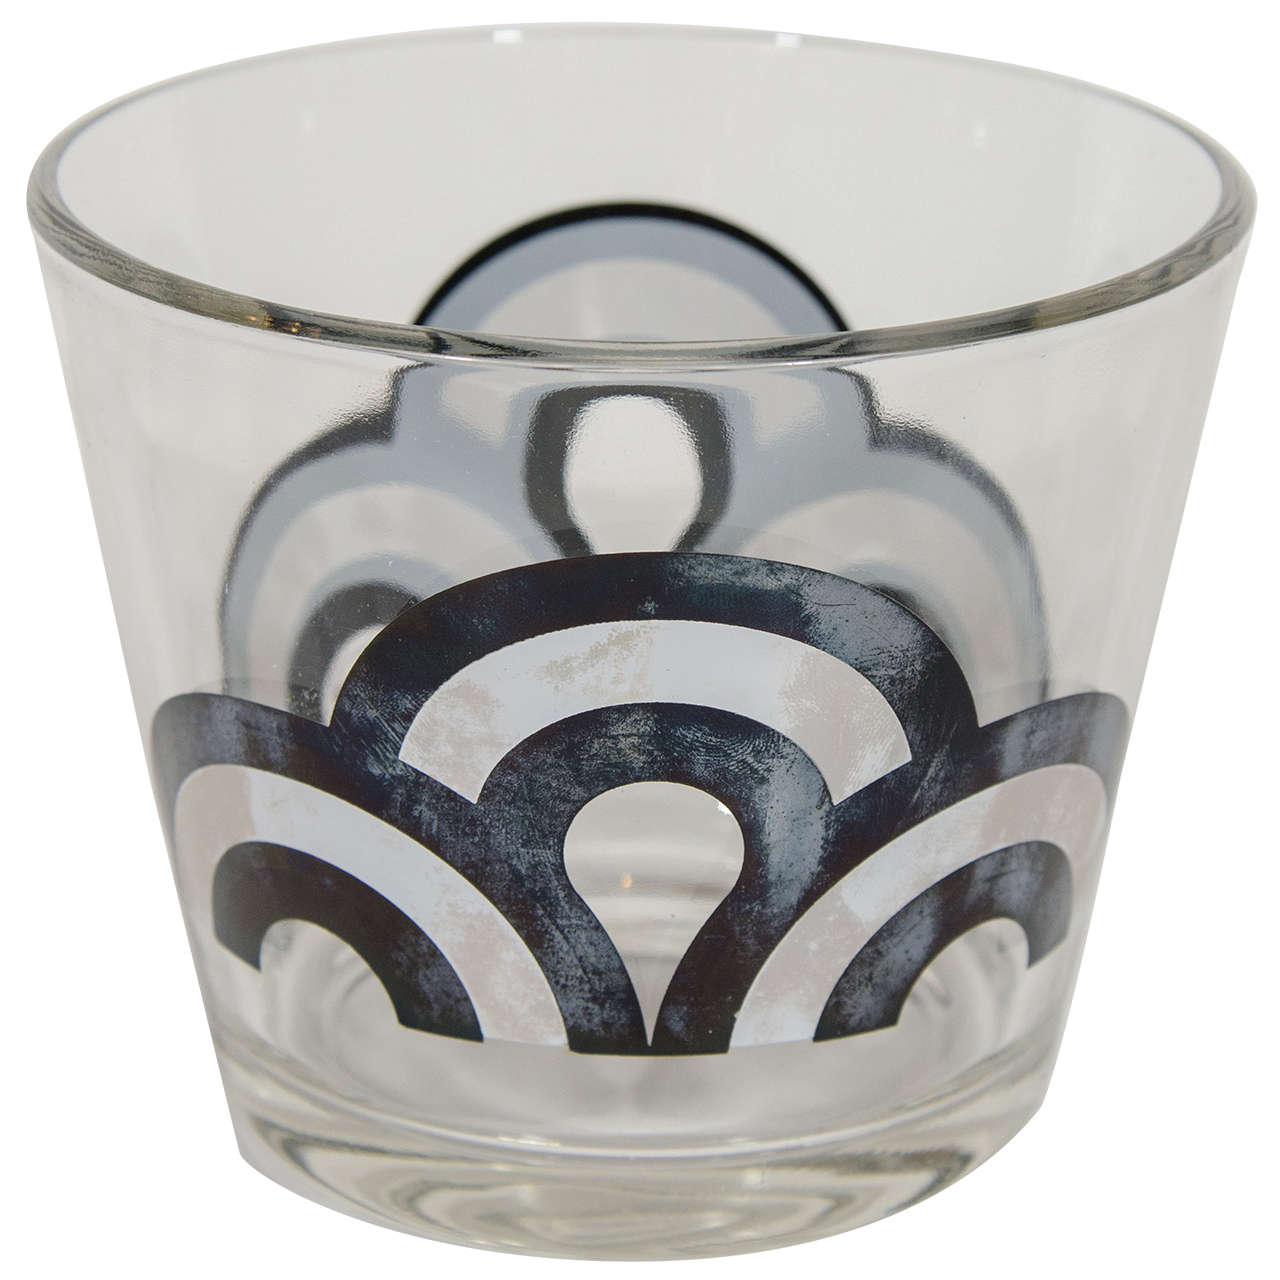 Vintage Ice Bucket or Cooler in Blown Glass with Geometric Design